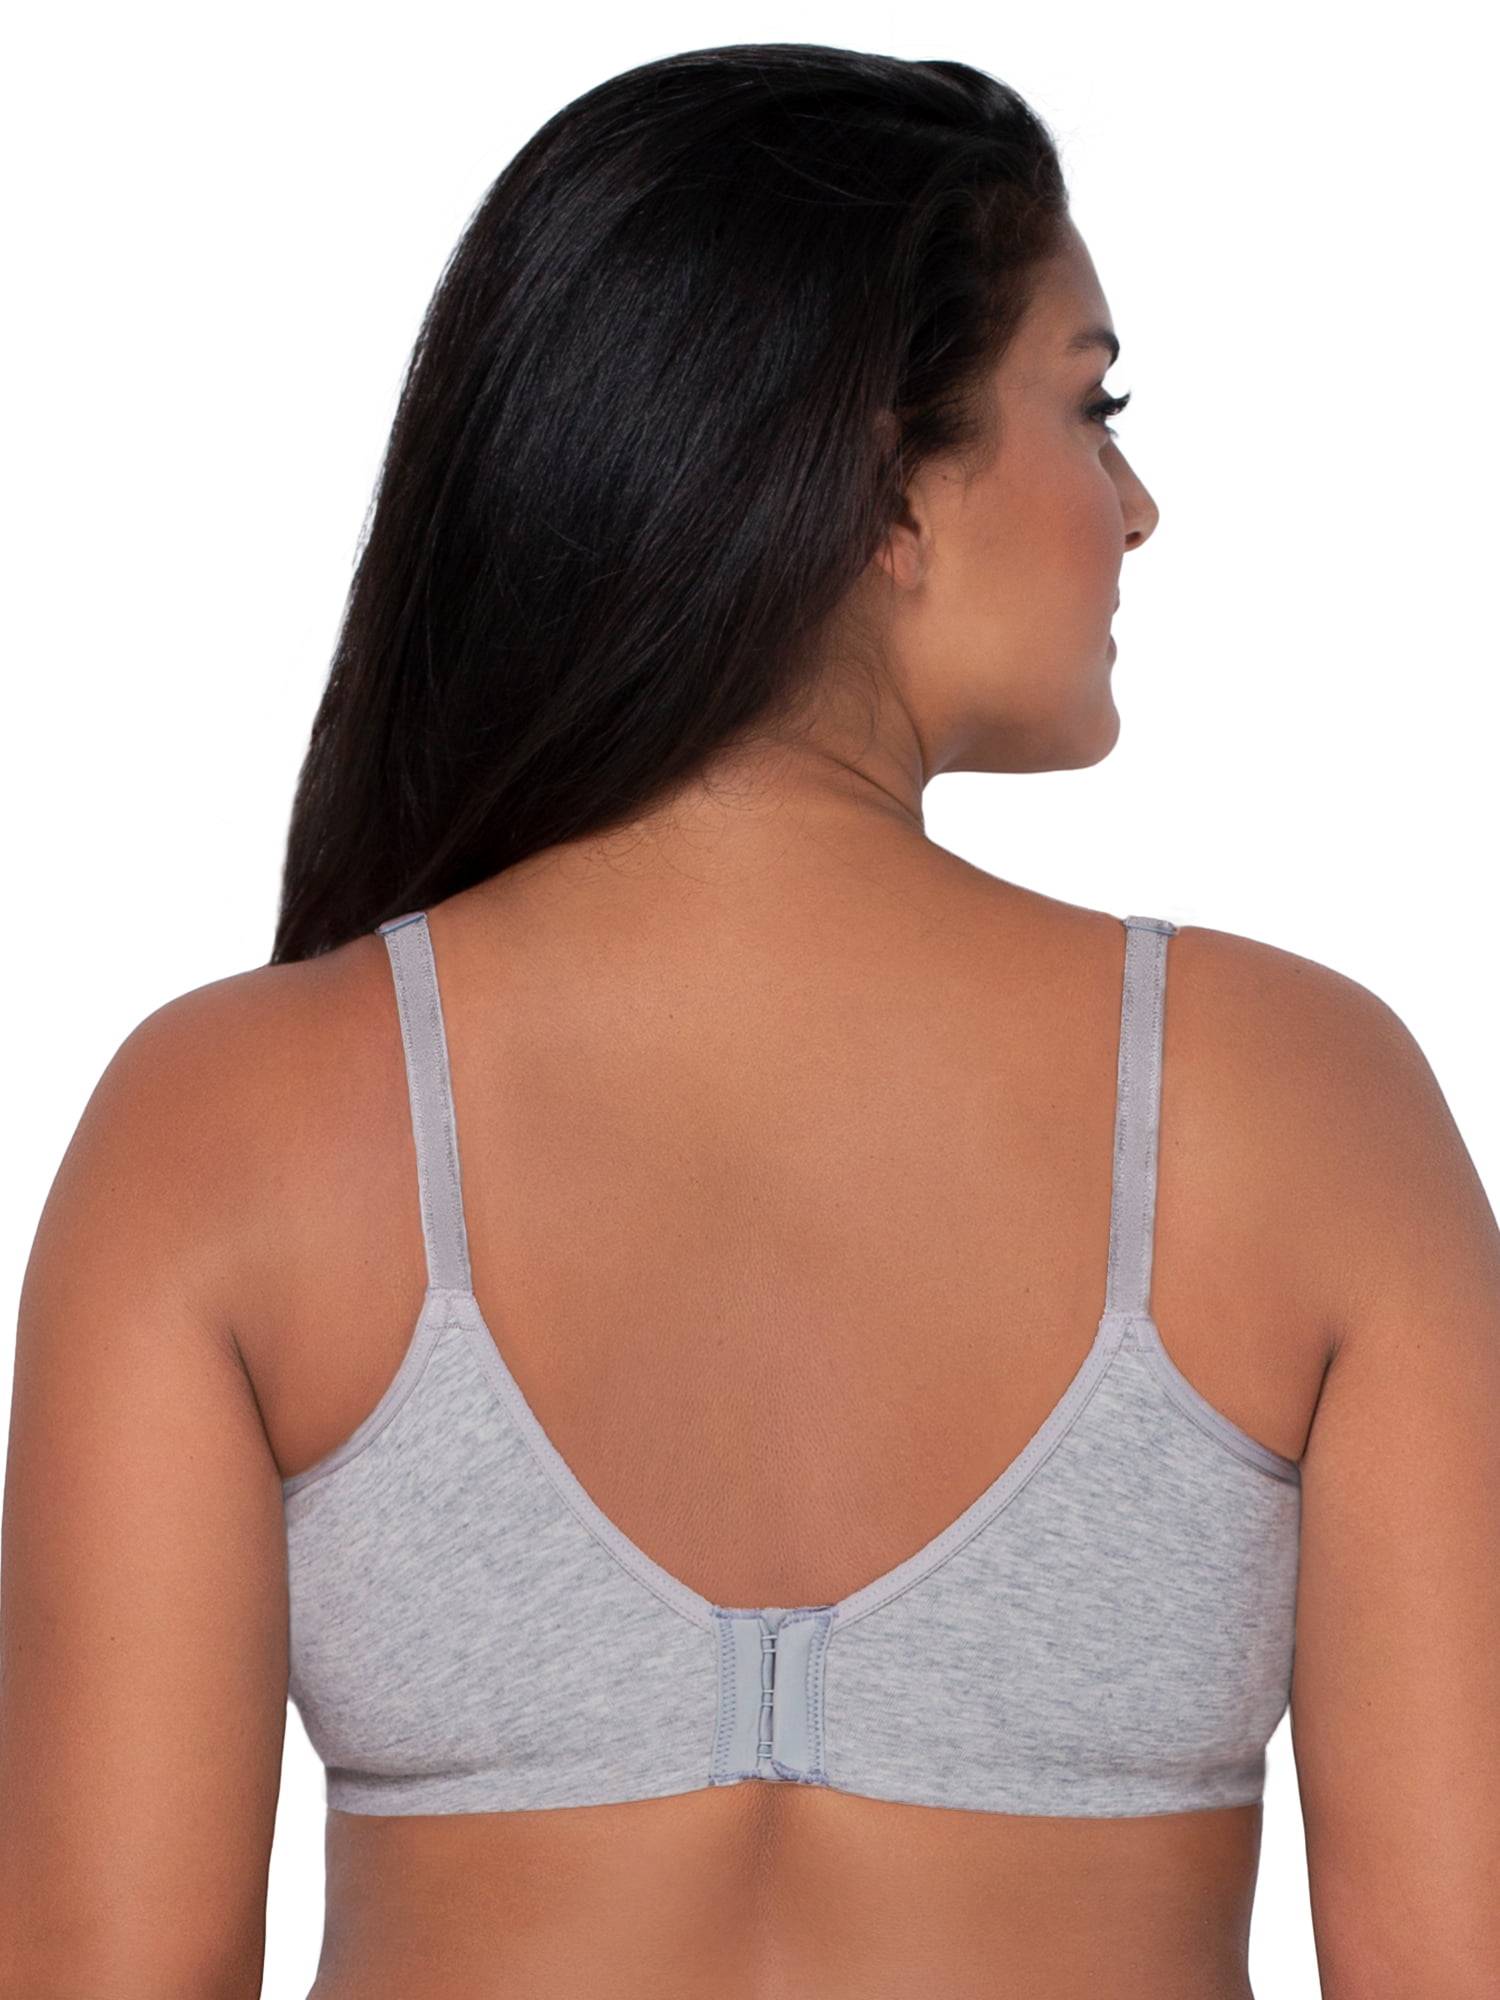 Fruit of the Loom – Fleece Lined Wire-free Softcup Bra, Style 96248 –  /store: Goulds Marketing Services LLC